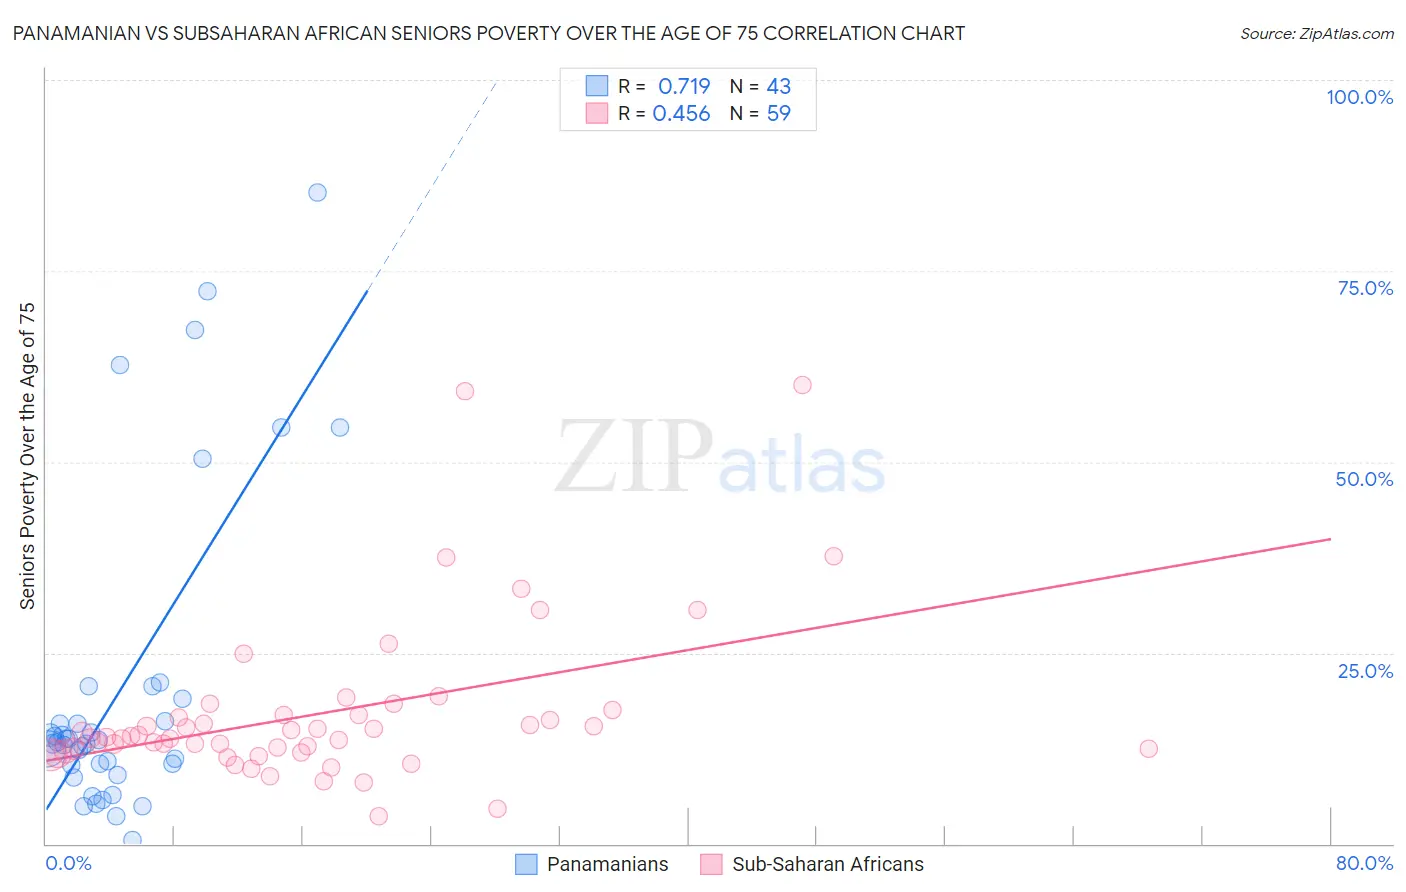 Panamanian vs Subsaharan African Seniors Poverty Over the Age of 75